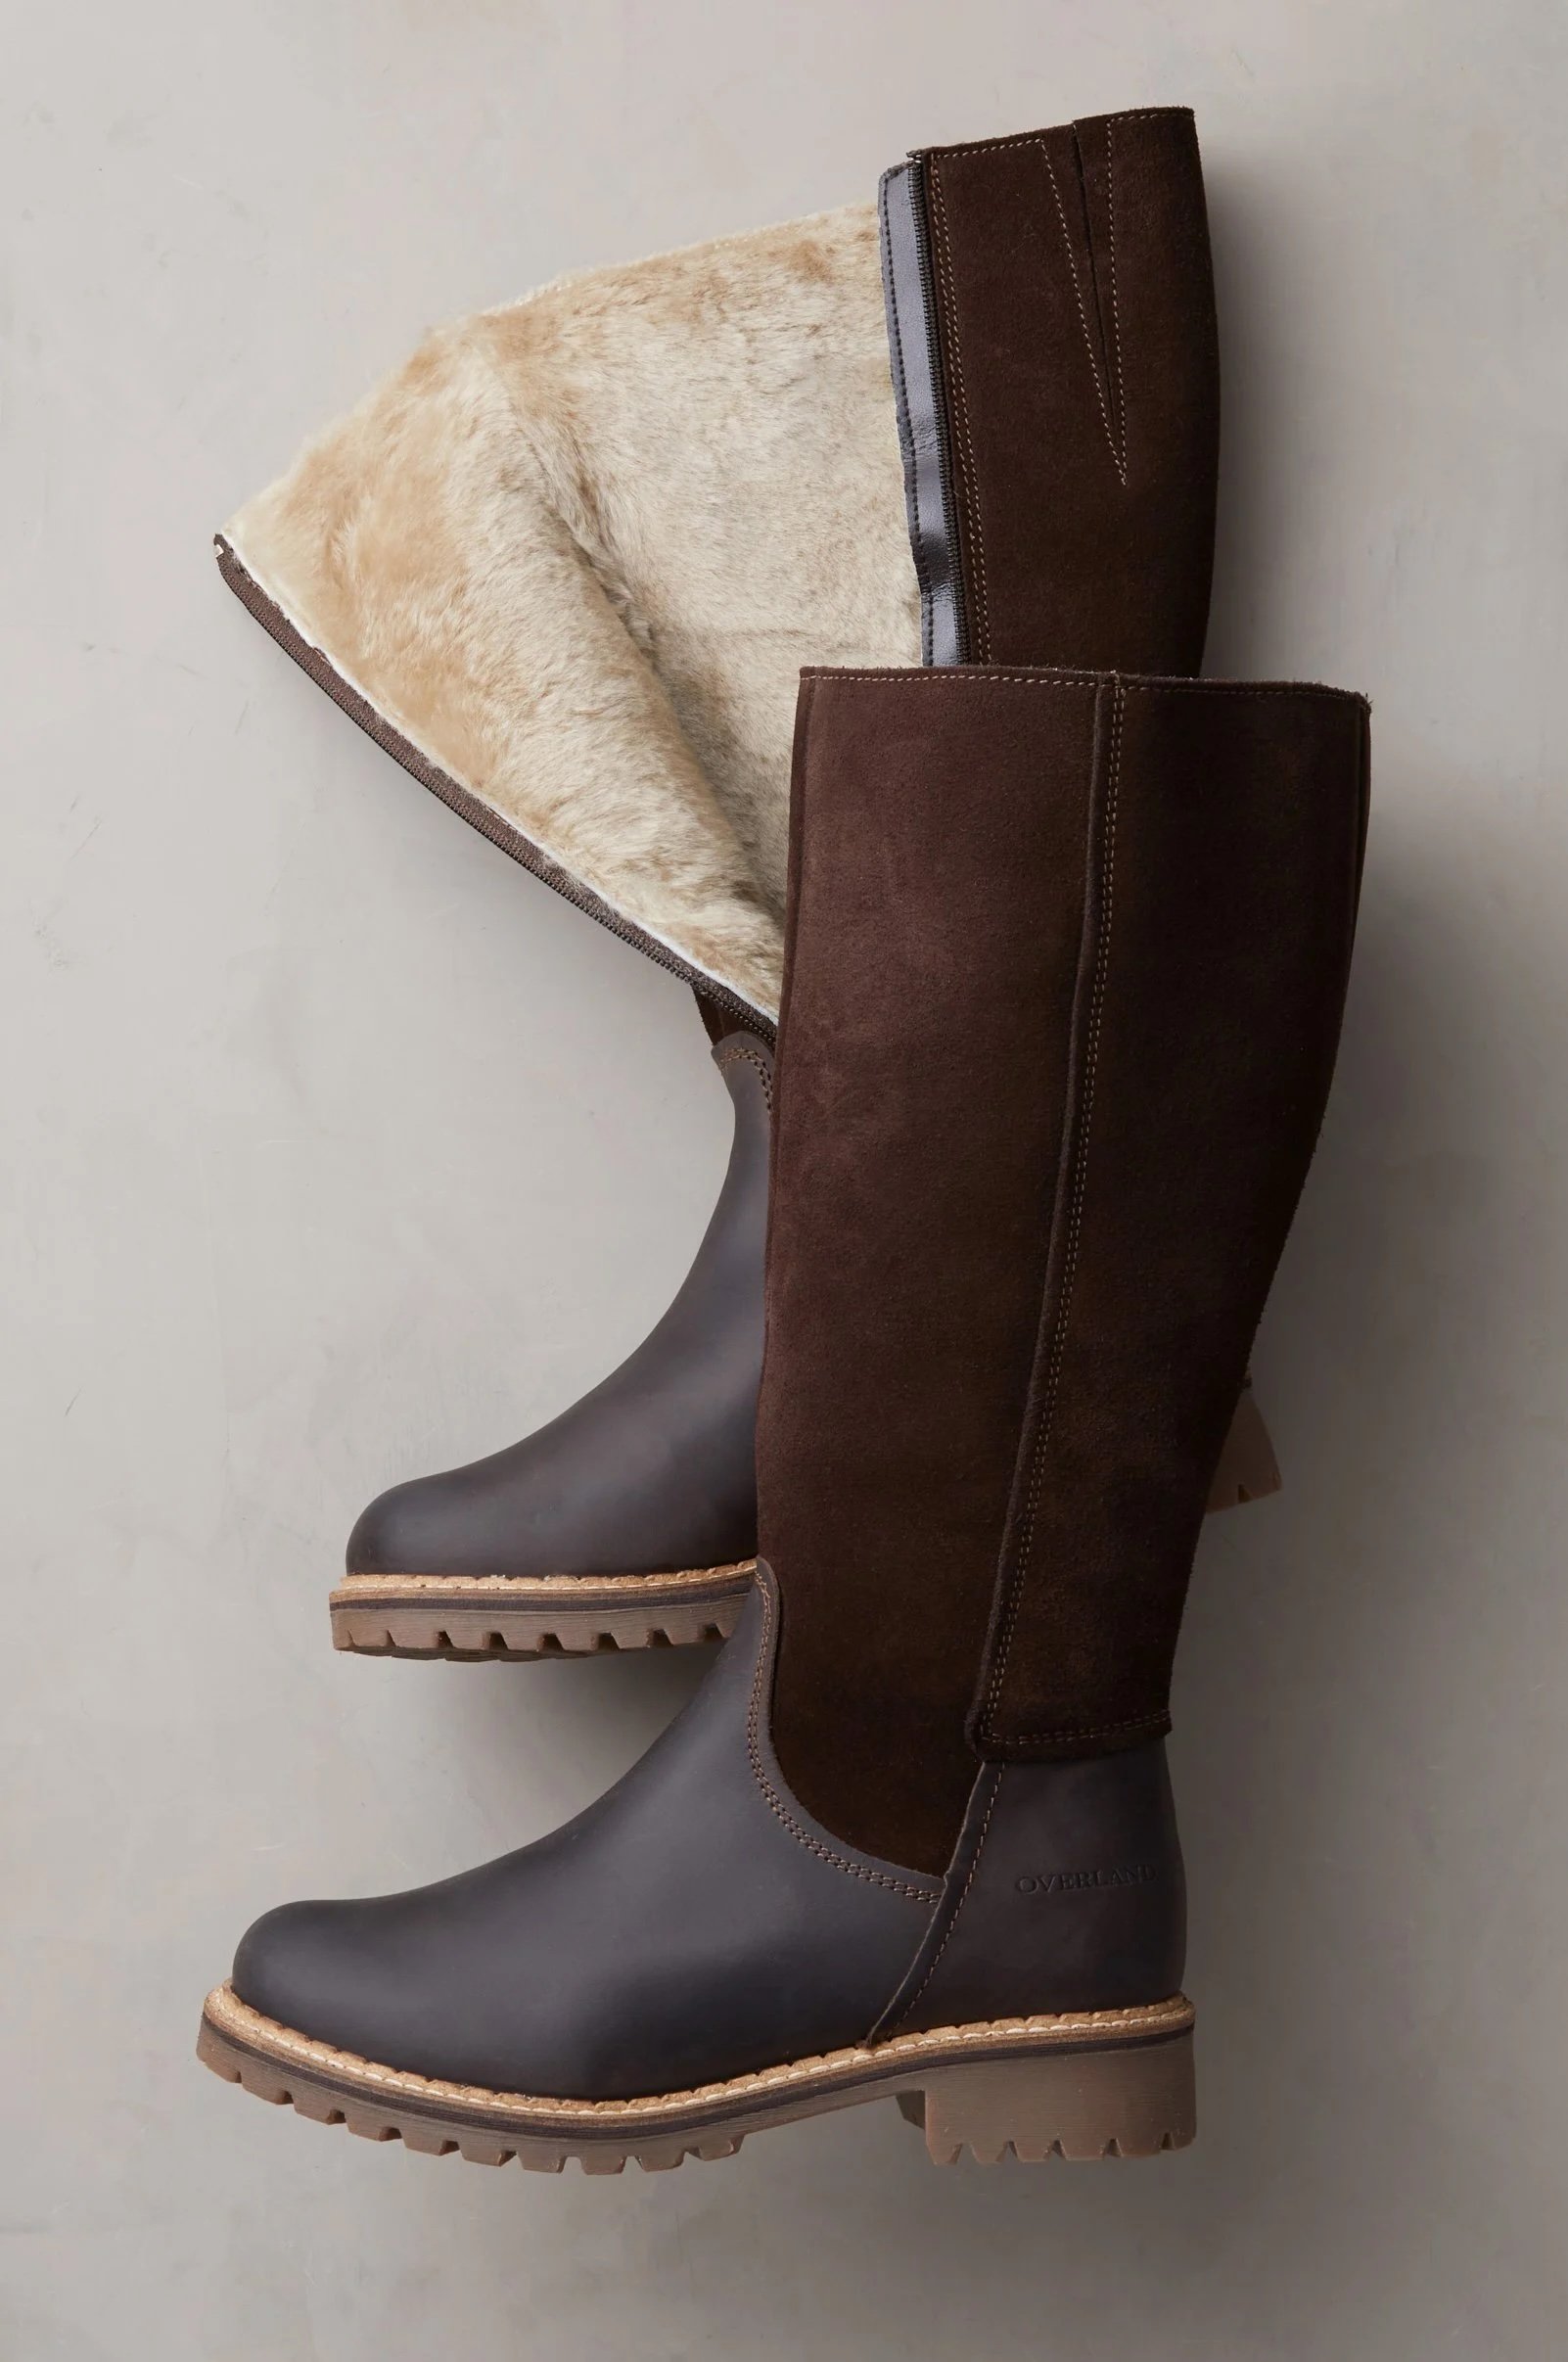 Shearling-Lined Leather Boots, $230+